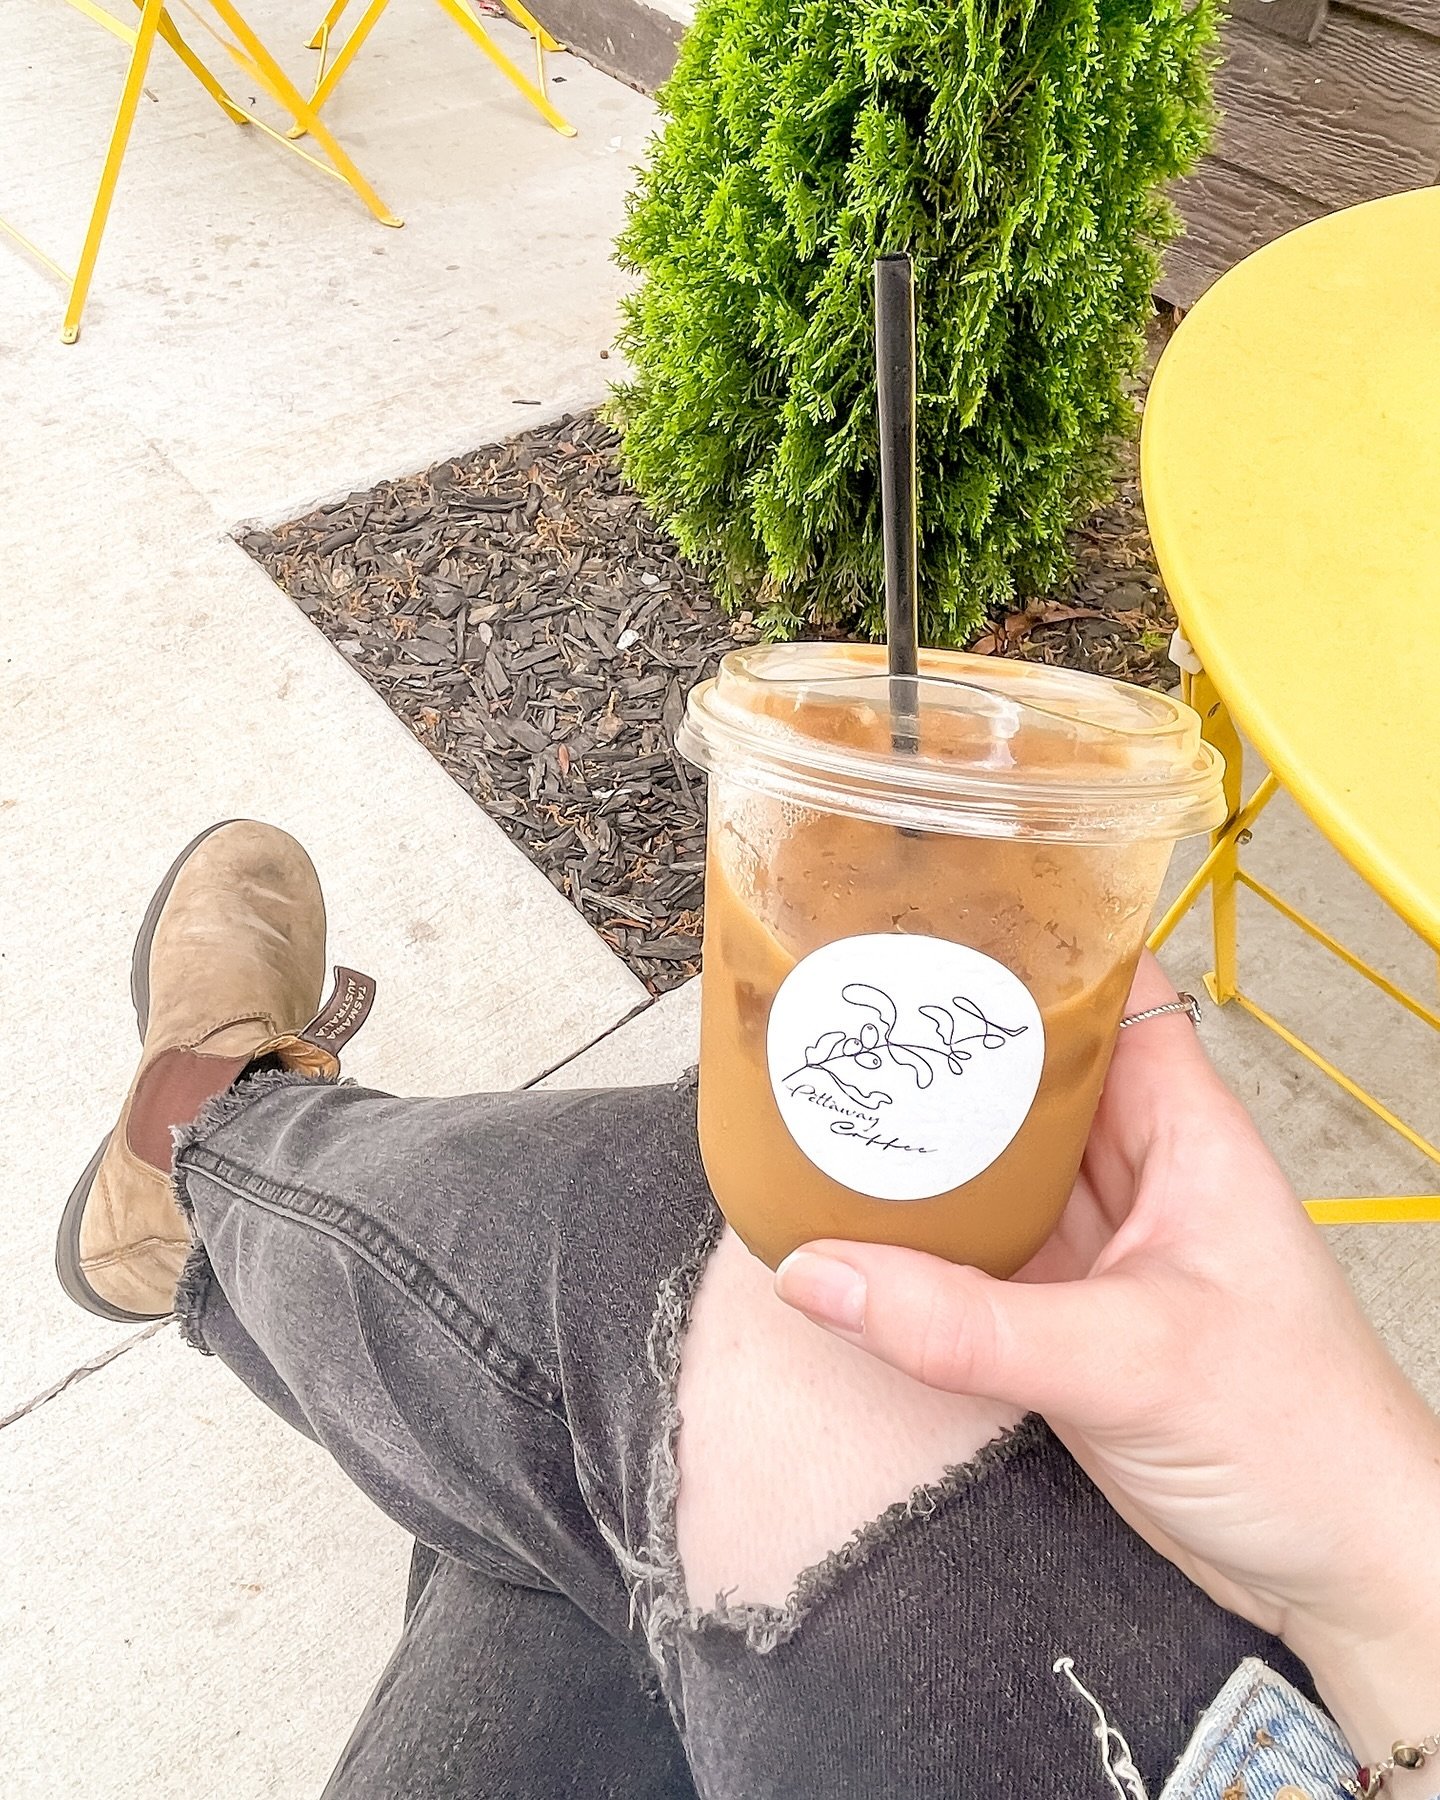 Celebrate Earth Day with us! We have the garage doors open, so it&rsquo;s like it&rsquo;s outside inside.

Bring your cups (or use our compostable ones), grab your earth-loving buddies, and hang with us until 5!